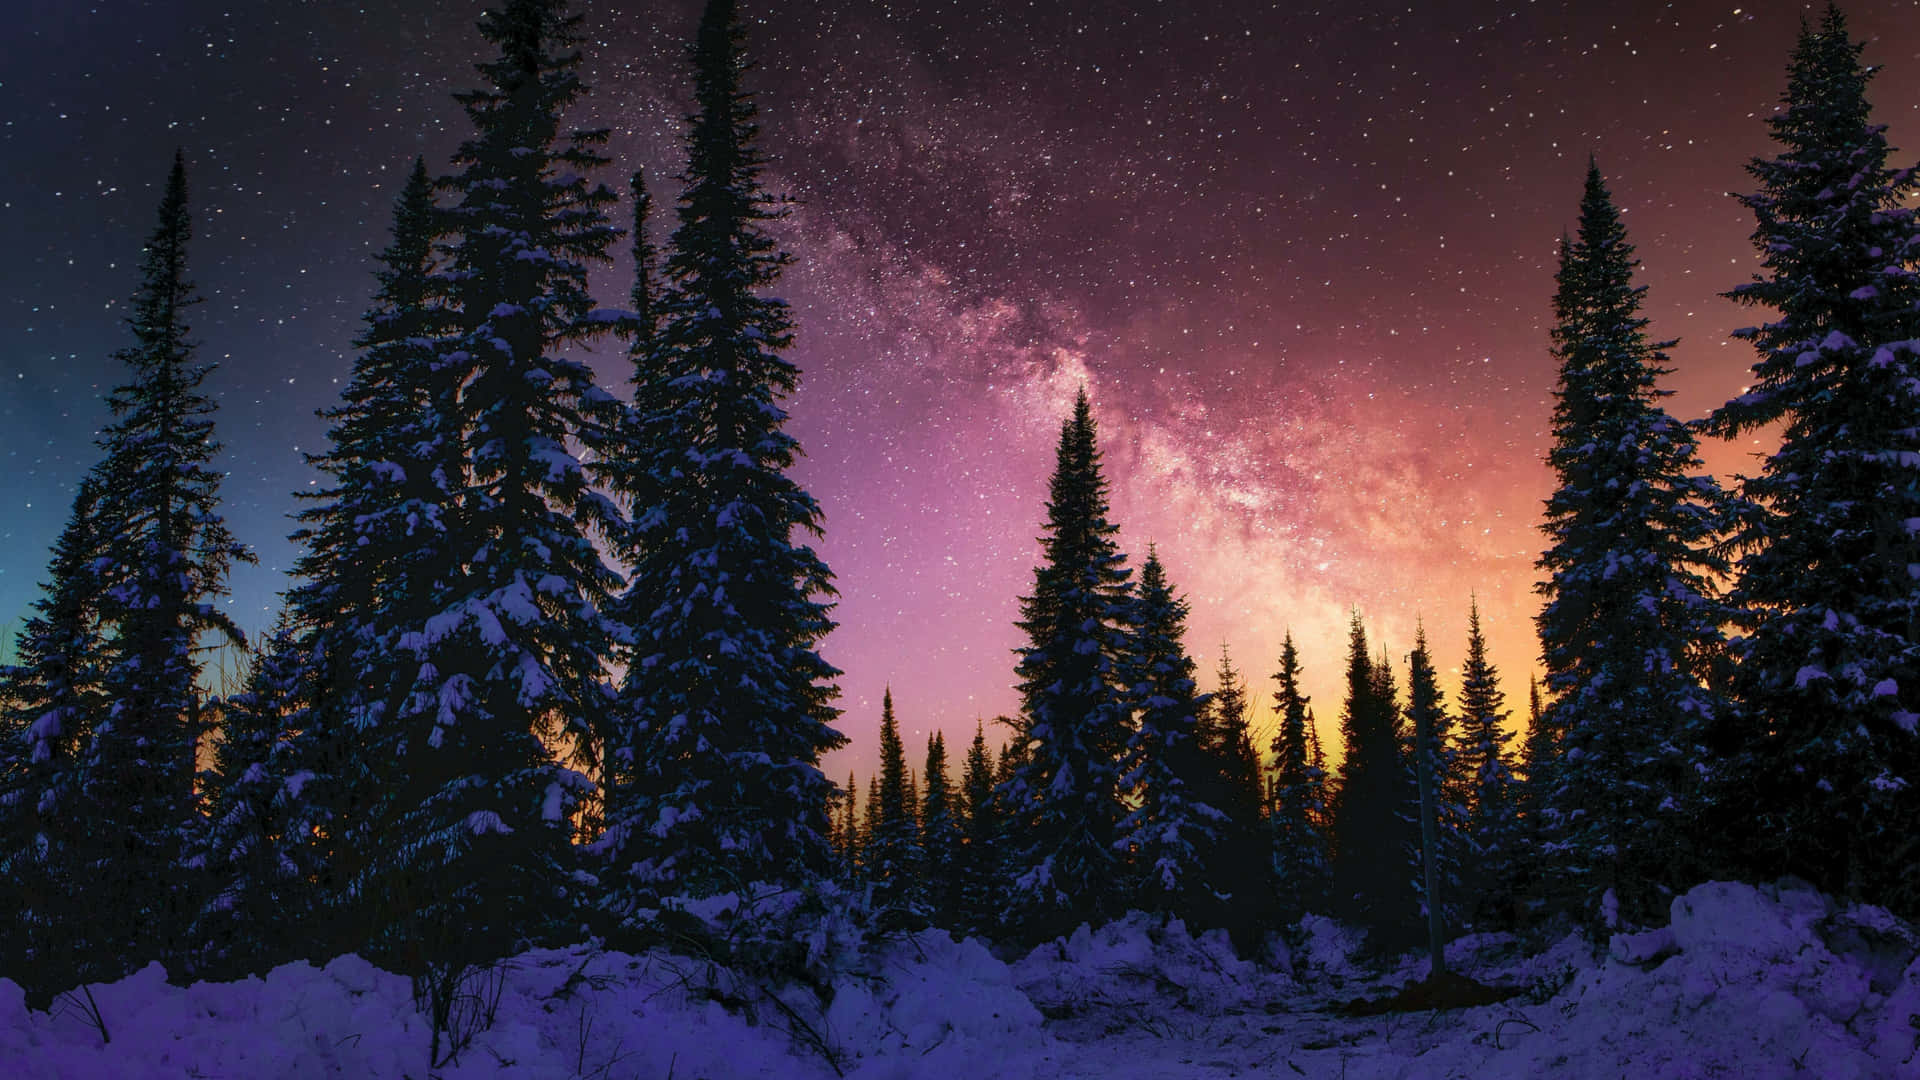 Enjoy the tranquility of a starry night in the forest Wallpaper